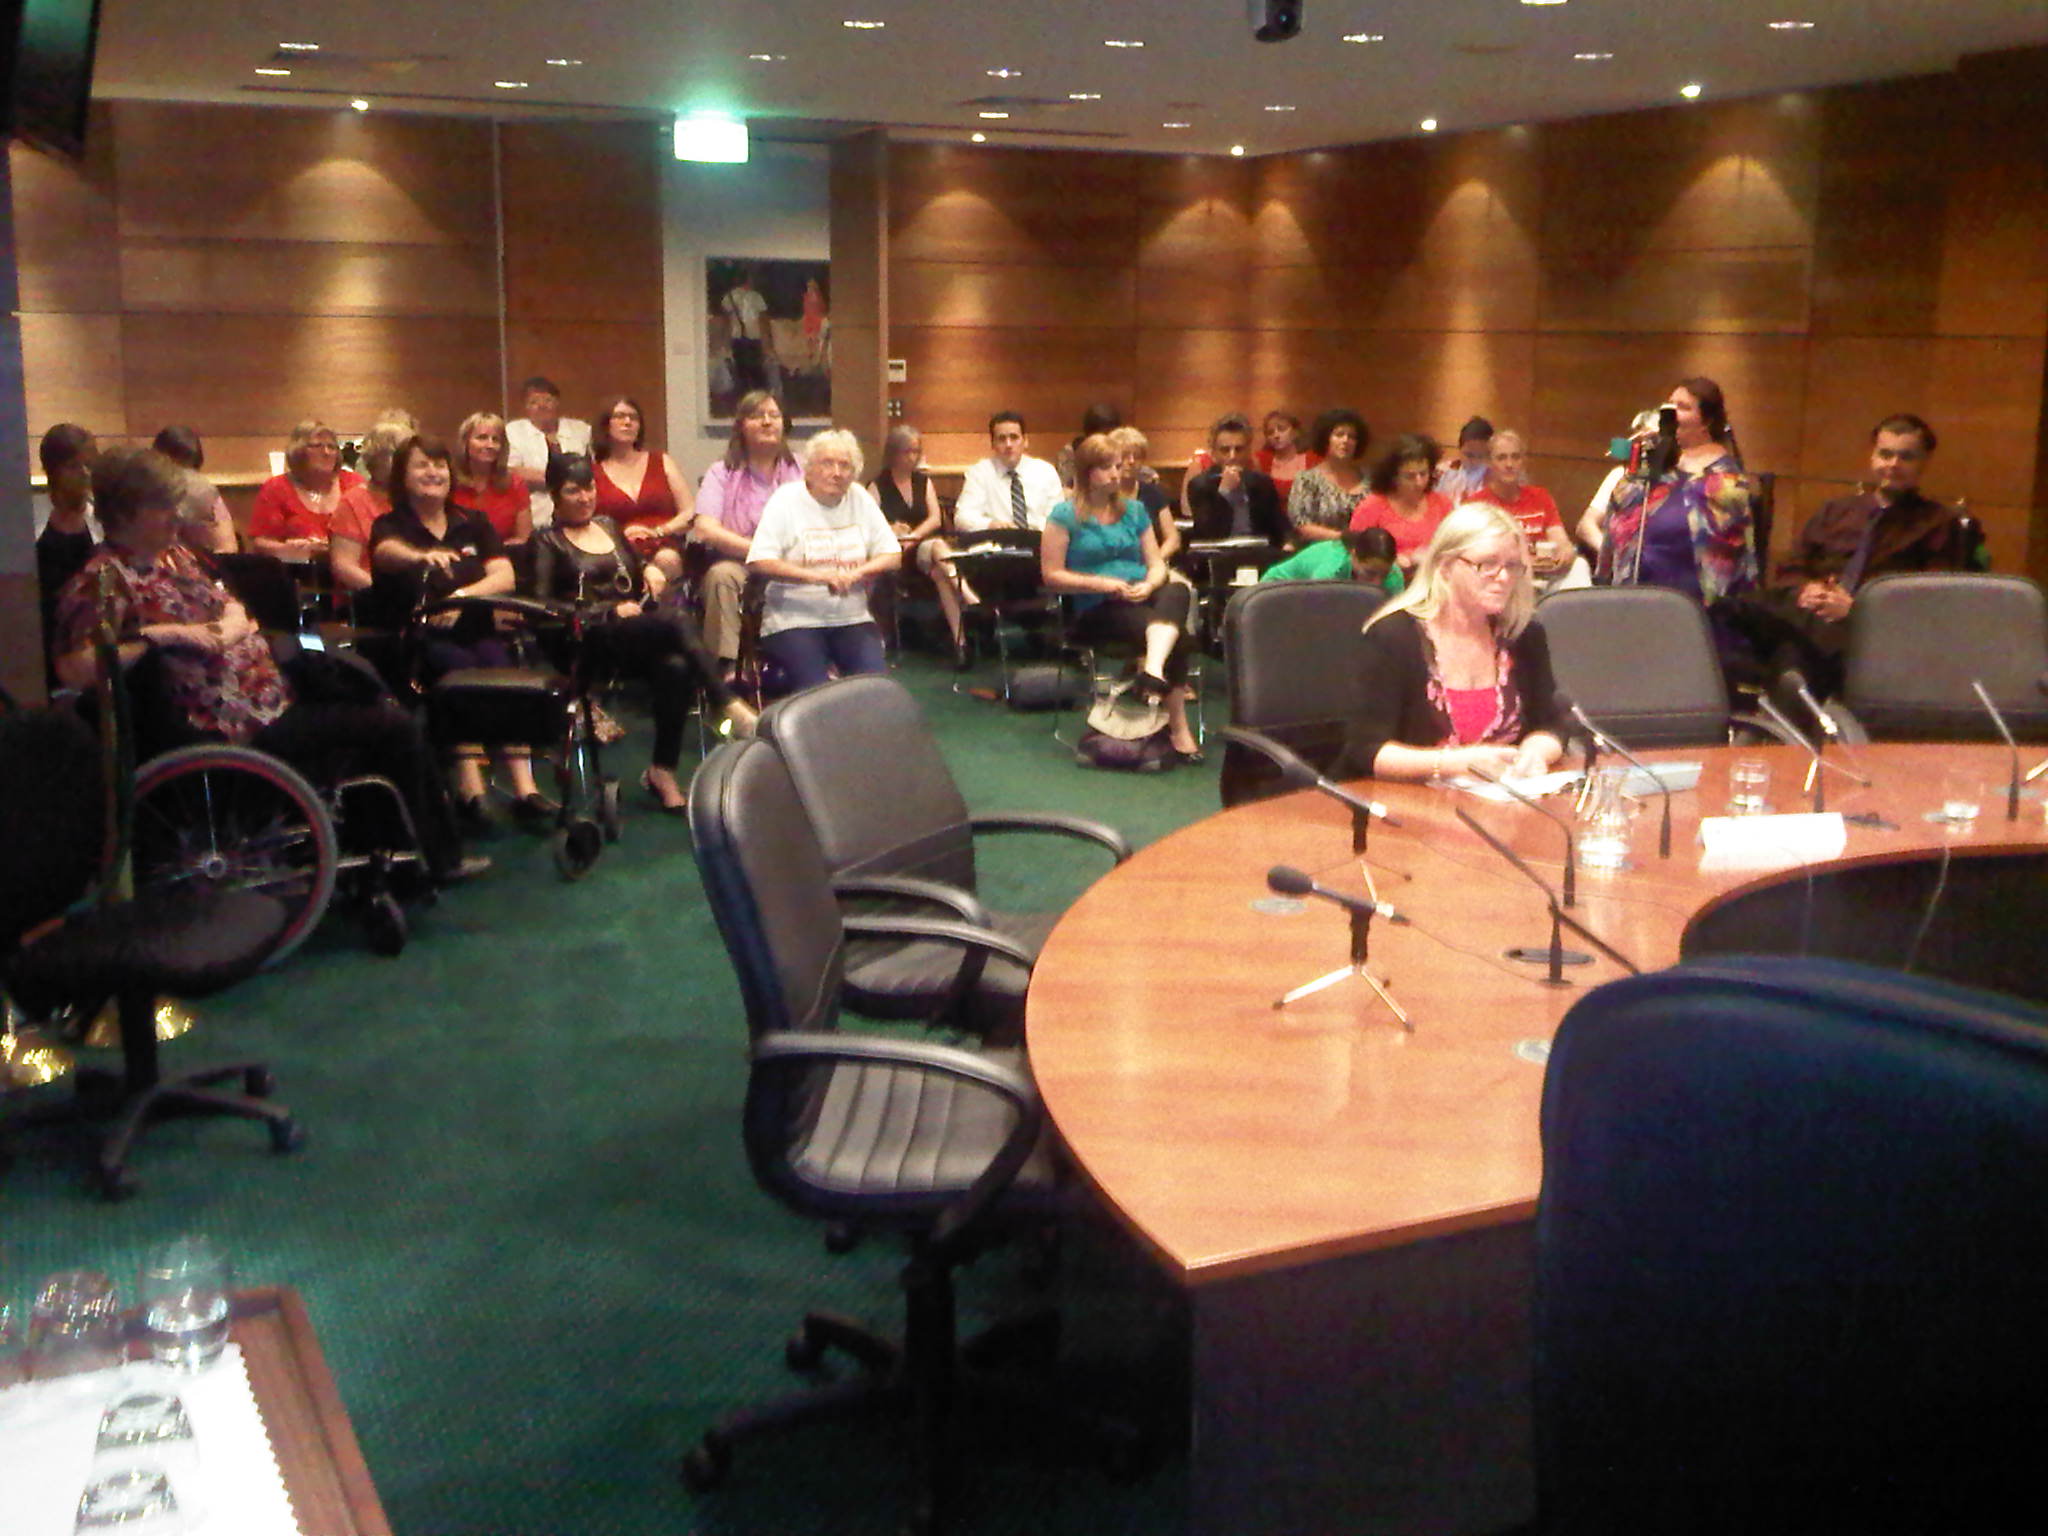 Witness and audience members at the Perth hearings, 18 February 2013.